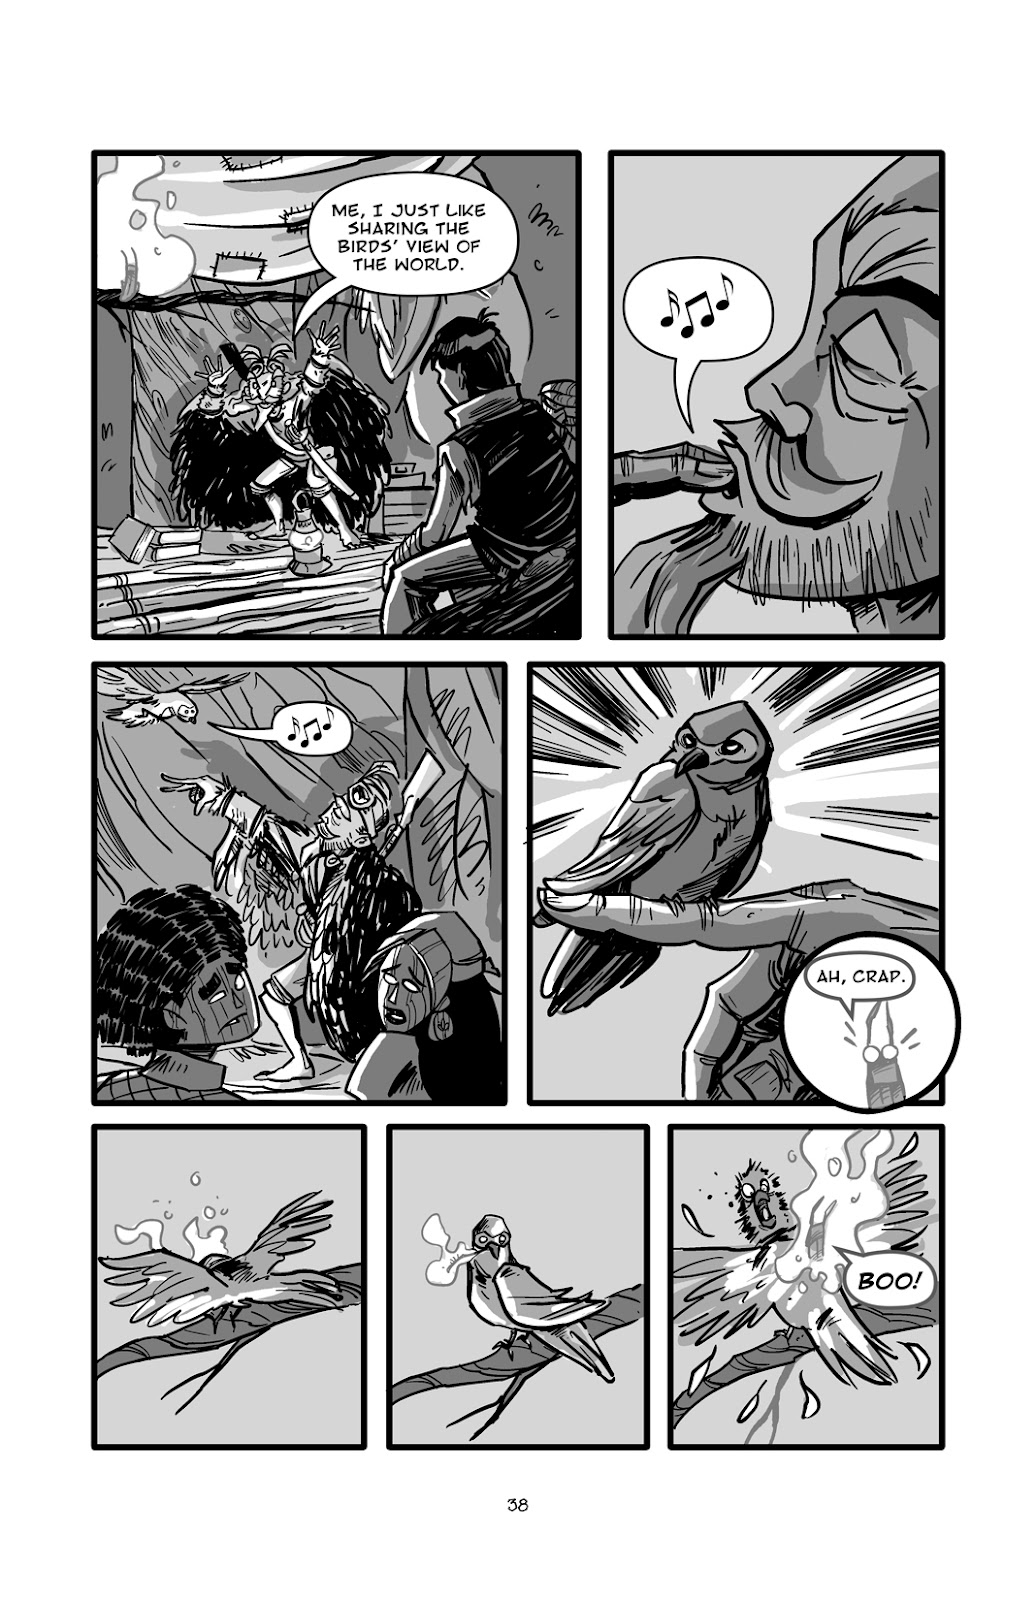 Pinocchio: Vampire Slayer - Of Wood and Blood issue 2 - Page 12